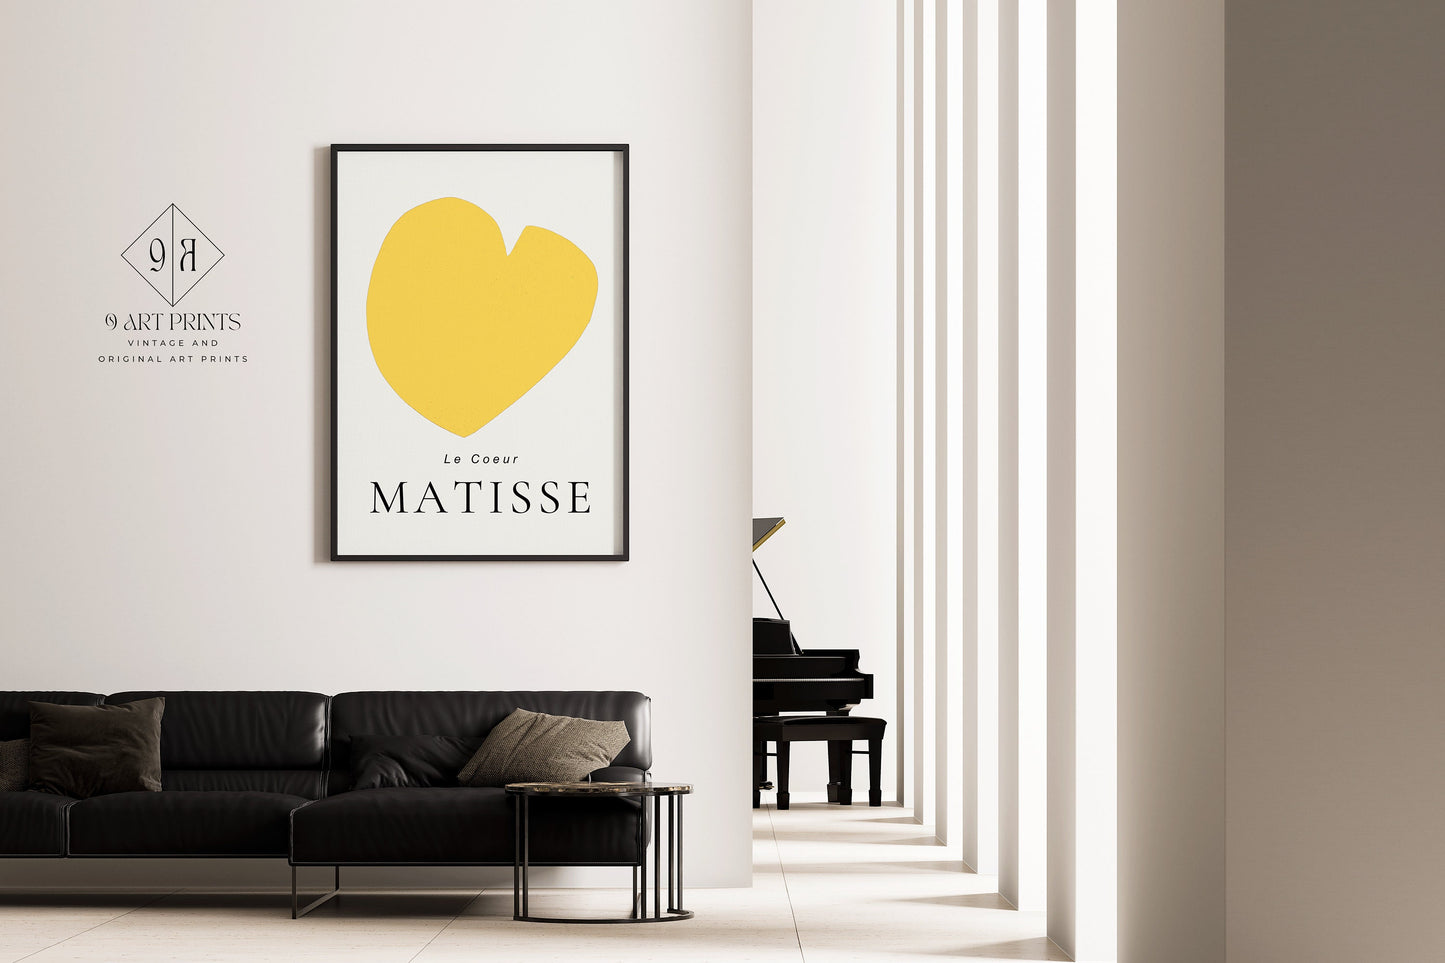 Framed Henri Matisse The Heart POSTER Black Yellow Famous Art Print Retro Museum Ready to Hang Home Office Decor Gift Berggruen and Cie